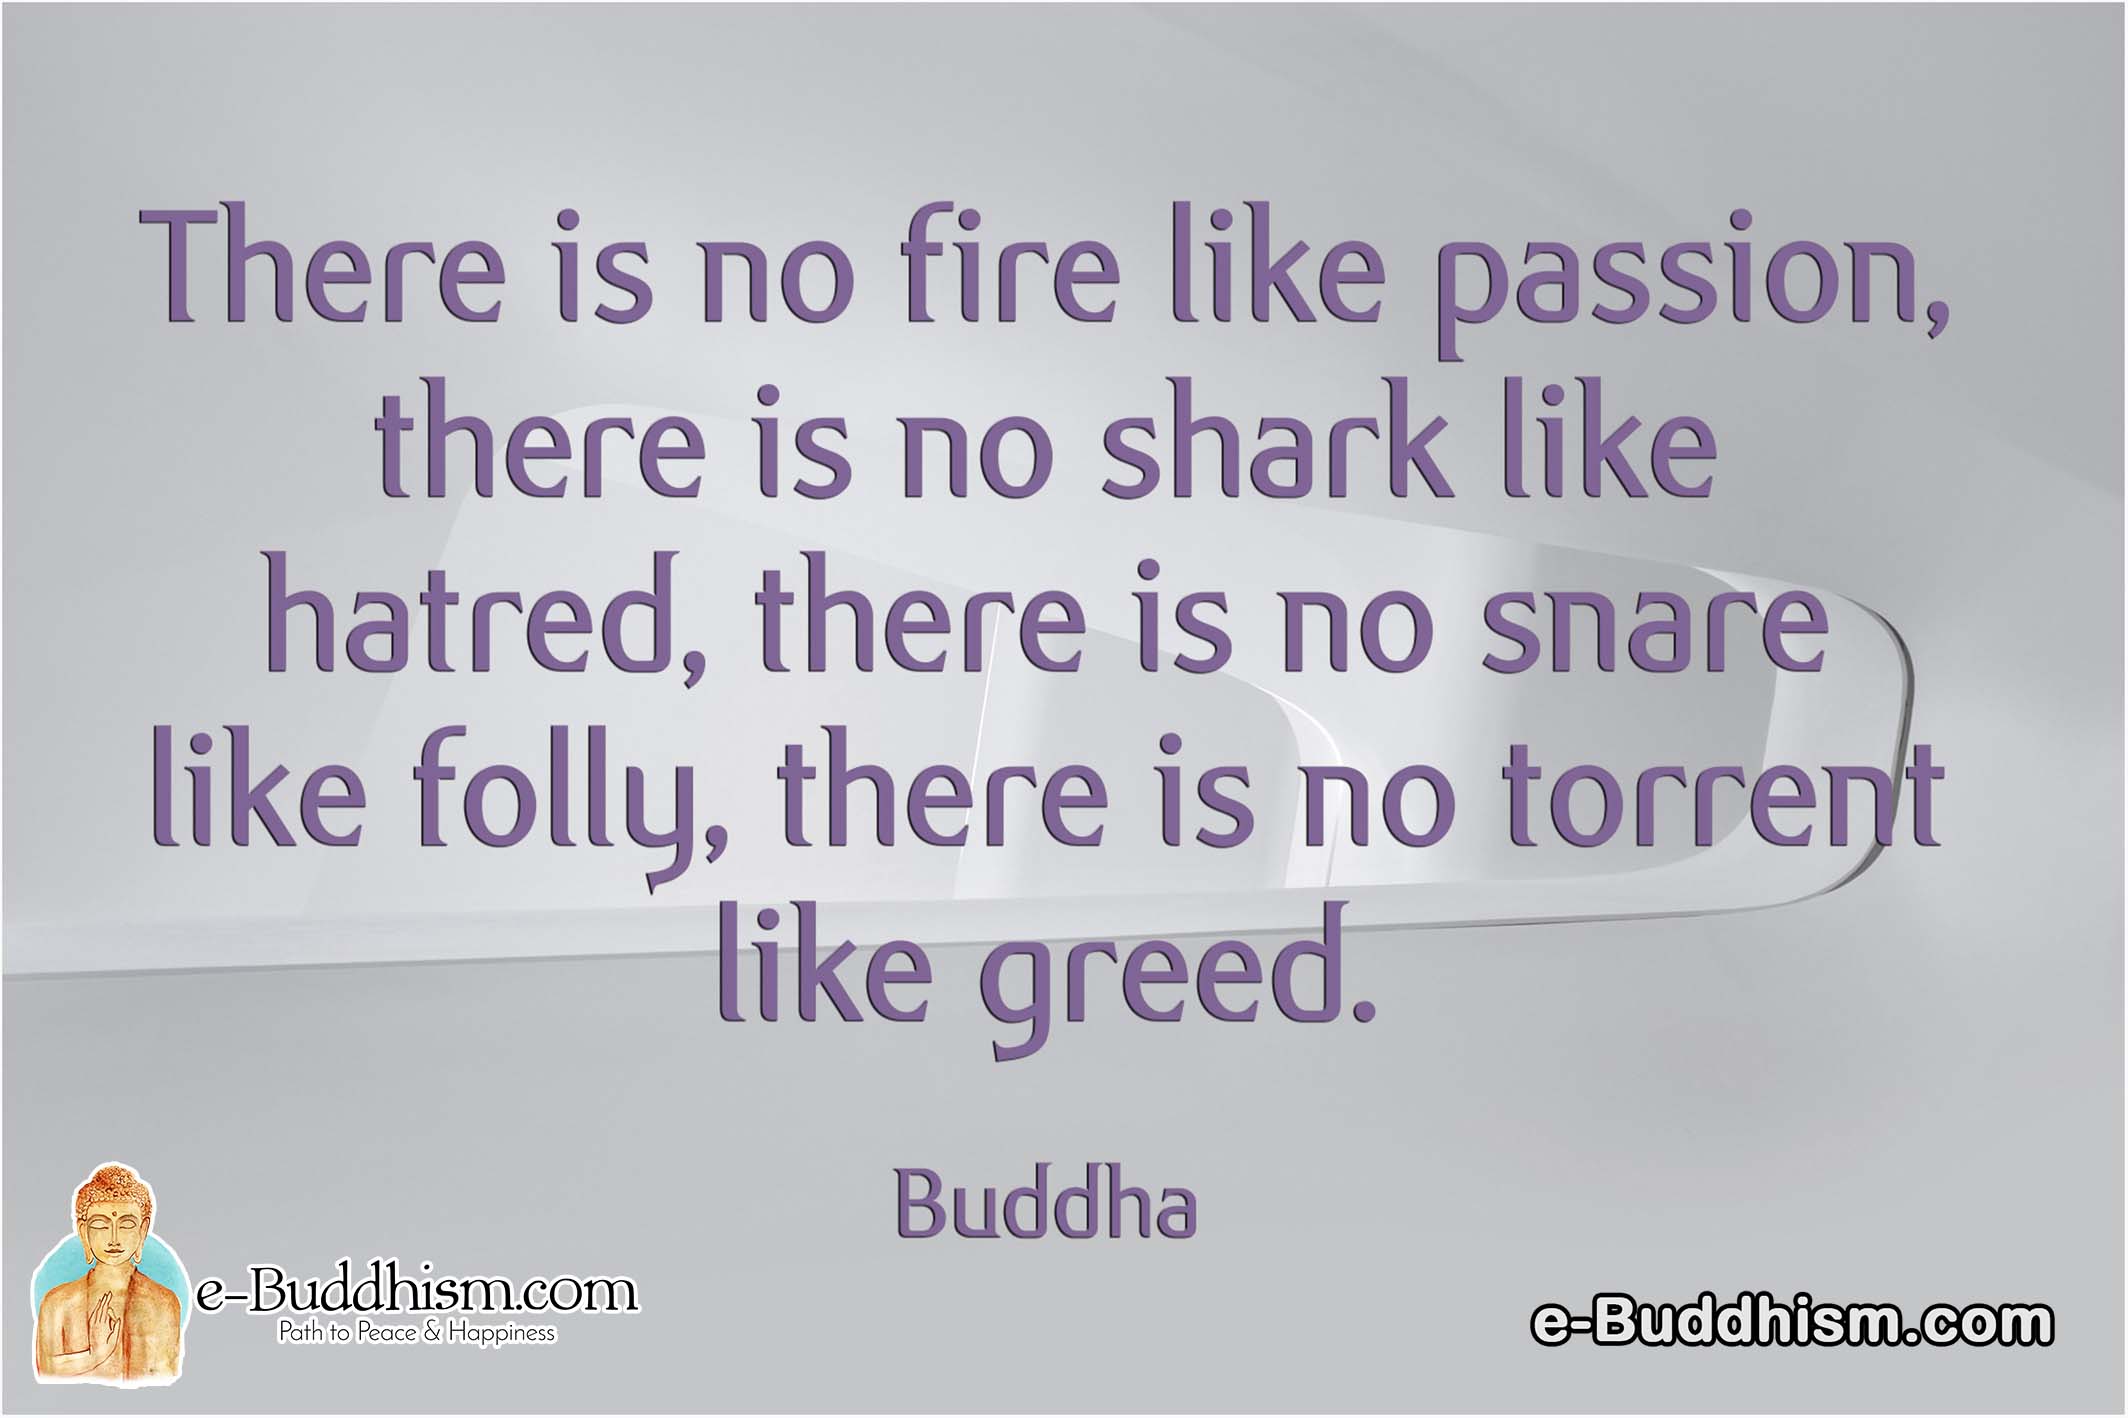 There is no fire like passion, there is no shark-like hatred, there is no snare like folly, and there is no torrent like greed. -Buddha